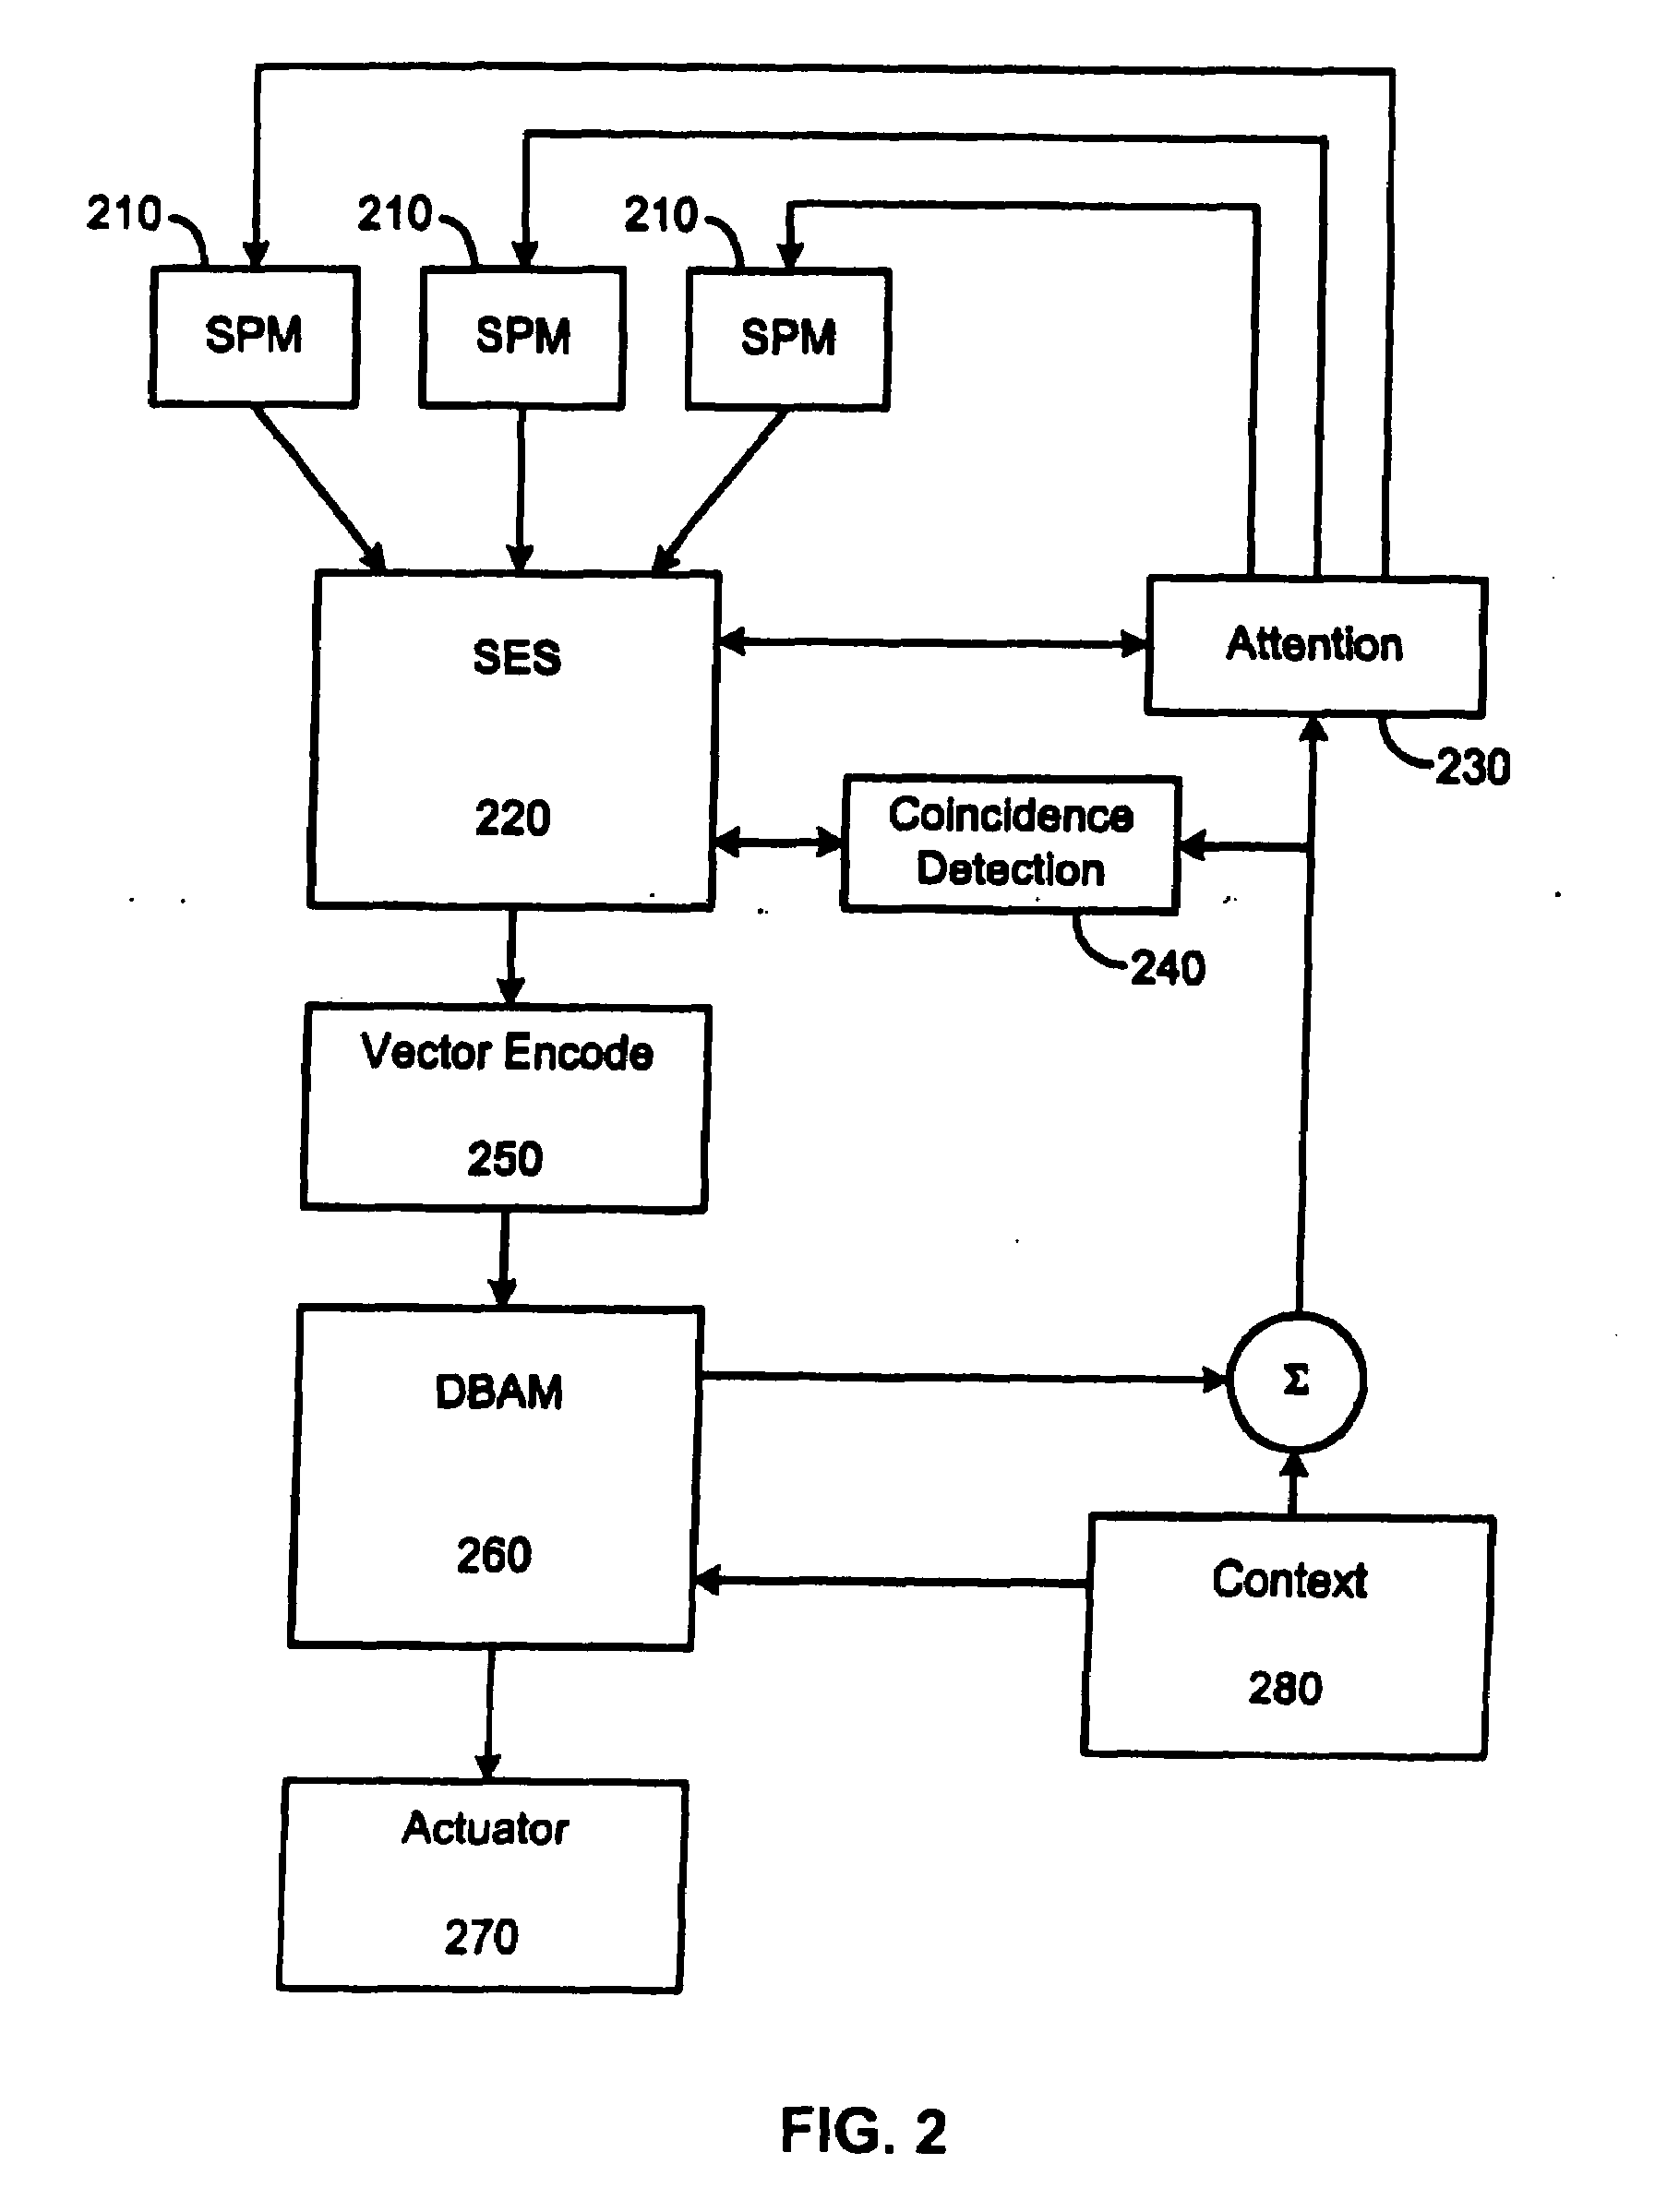 System and method for image mapping and visual attention